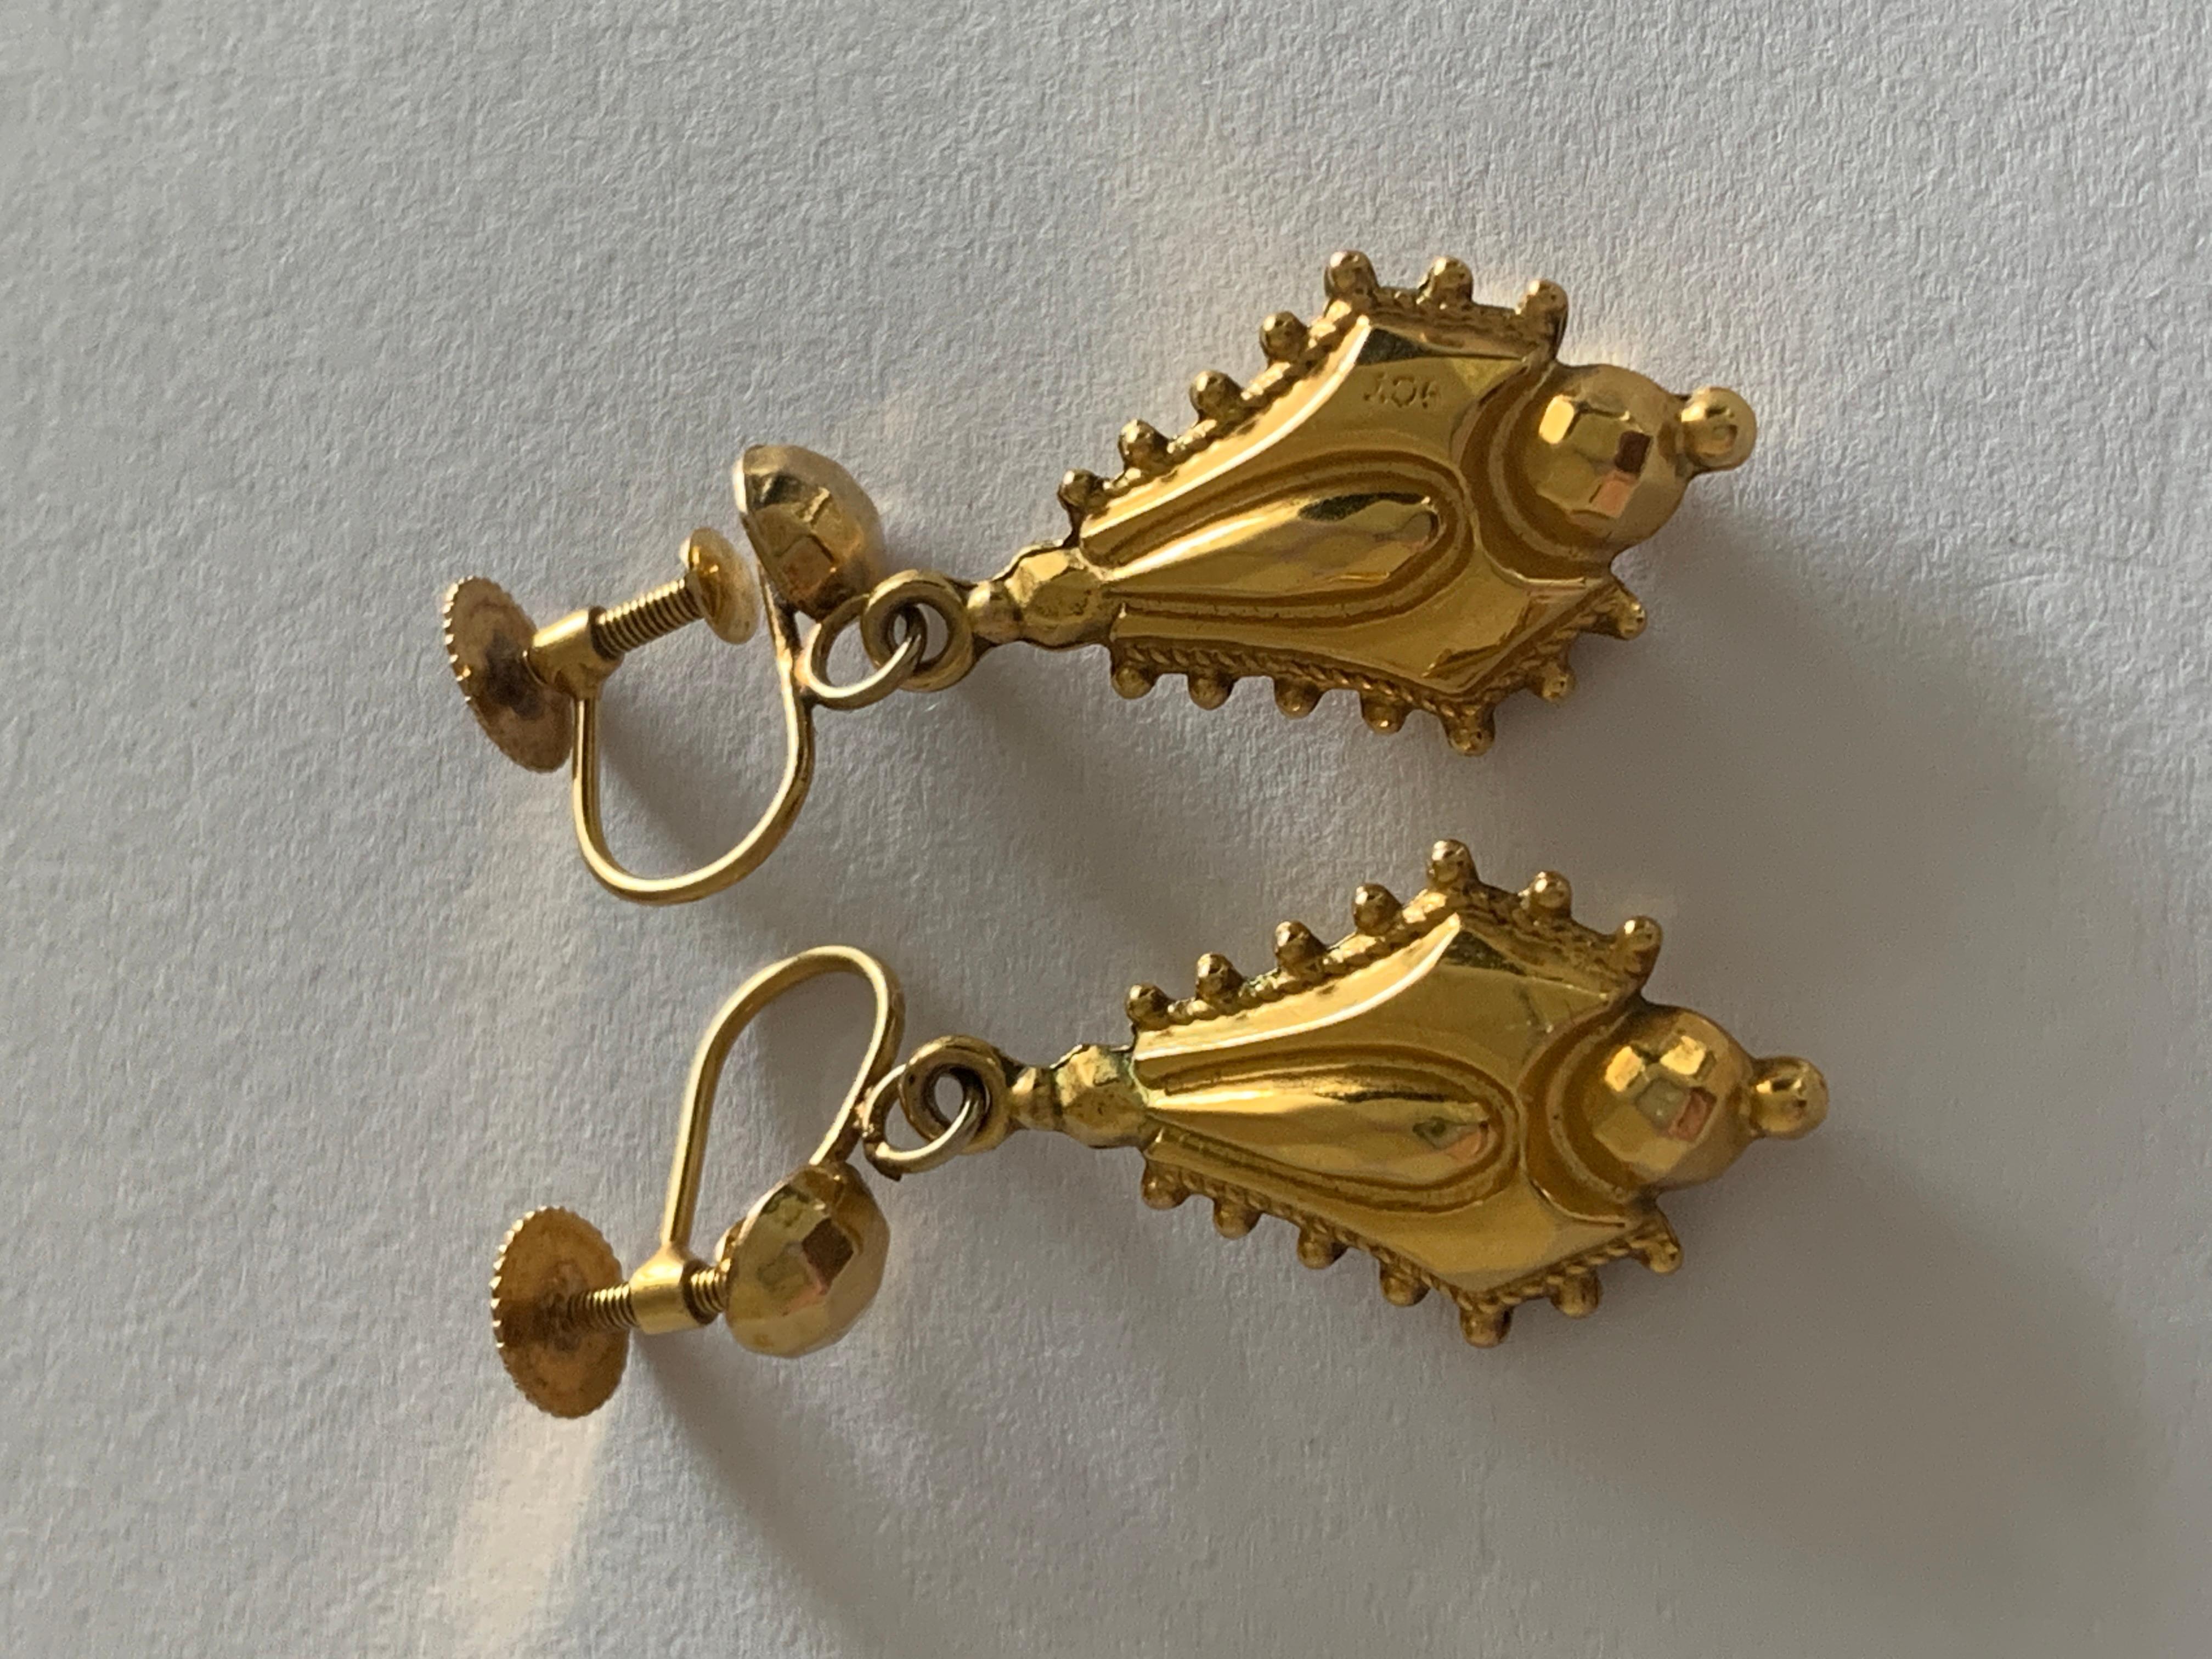 Exquisite
9ct Gold Antique Earrings
Circa 1880s
with later screw fasteners ( circa 1920's)
Both main earrings & fittings are stamped 9ct
Weight 1.8 grams